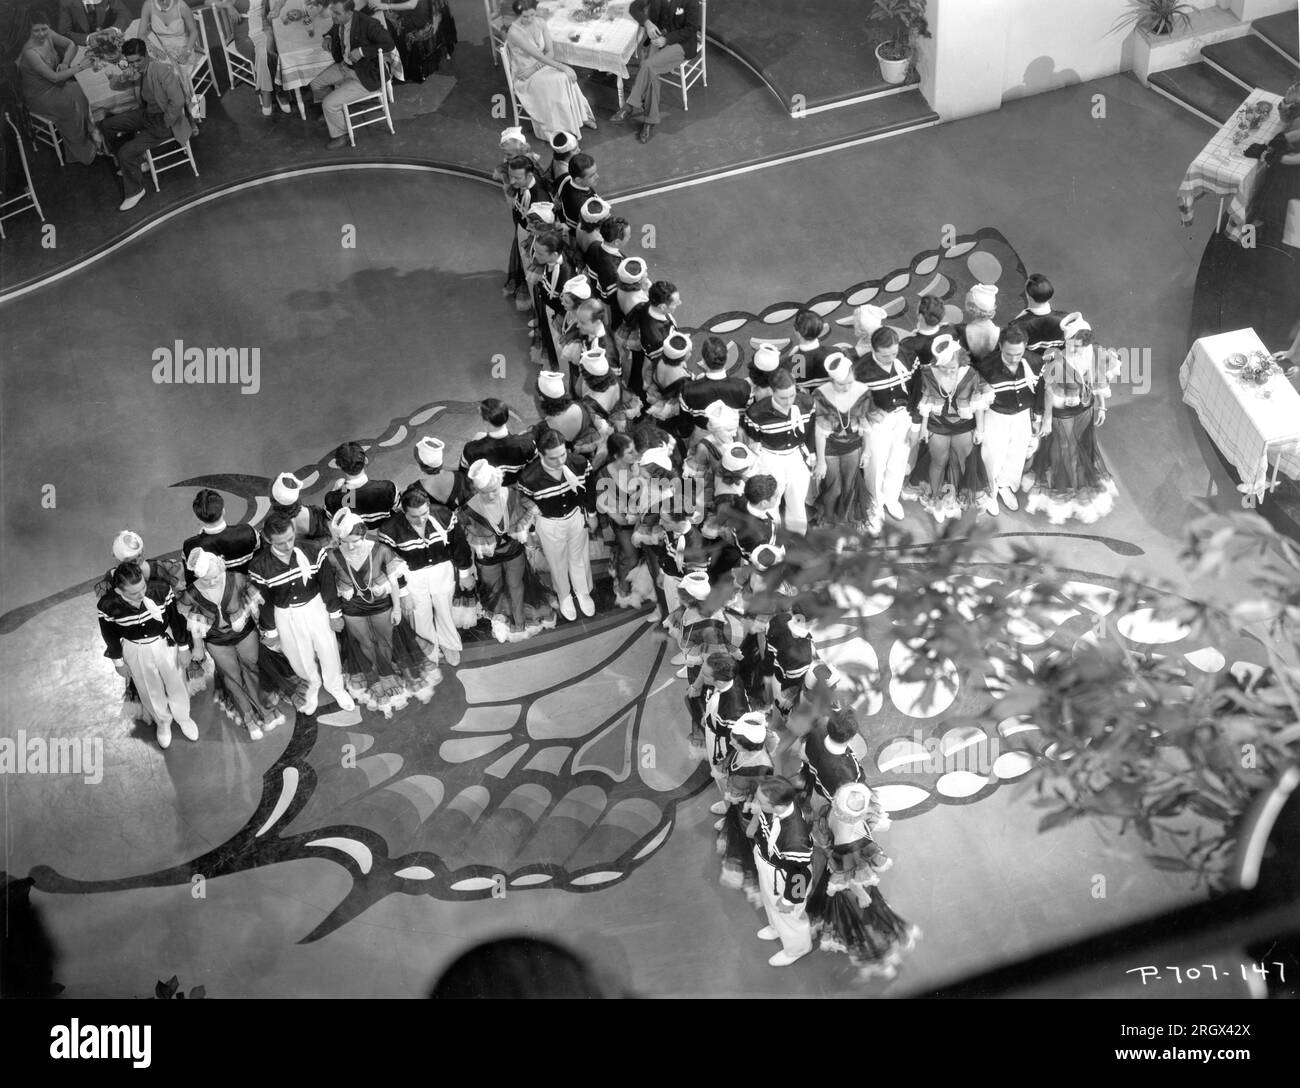 Male and Female Dancers forming shape of plane in nightclub musical number in FLYING DOWN TO RIO 1933 director THORNTON FREELAND music Vincent Youmans lyrics Gus Kahn and Edward Eliscu costumes Walter Plunkett and (uncredited) Irene RKO Radio Pictures Stock Photo